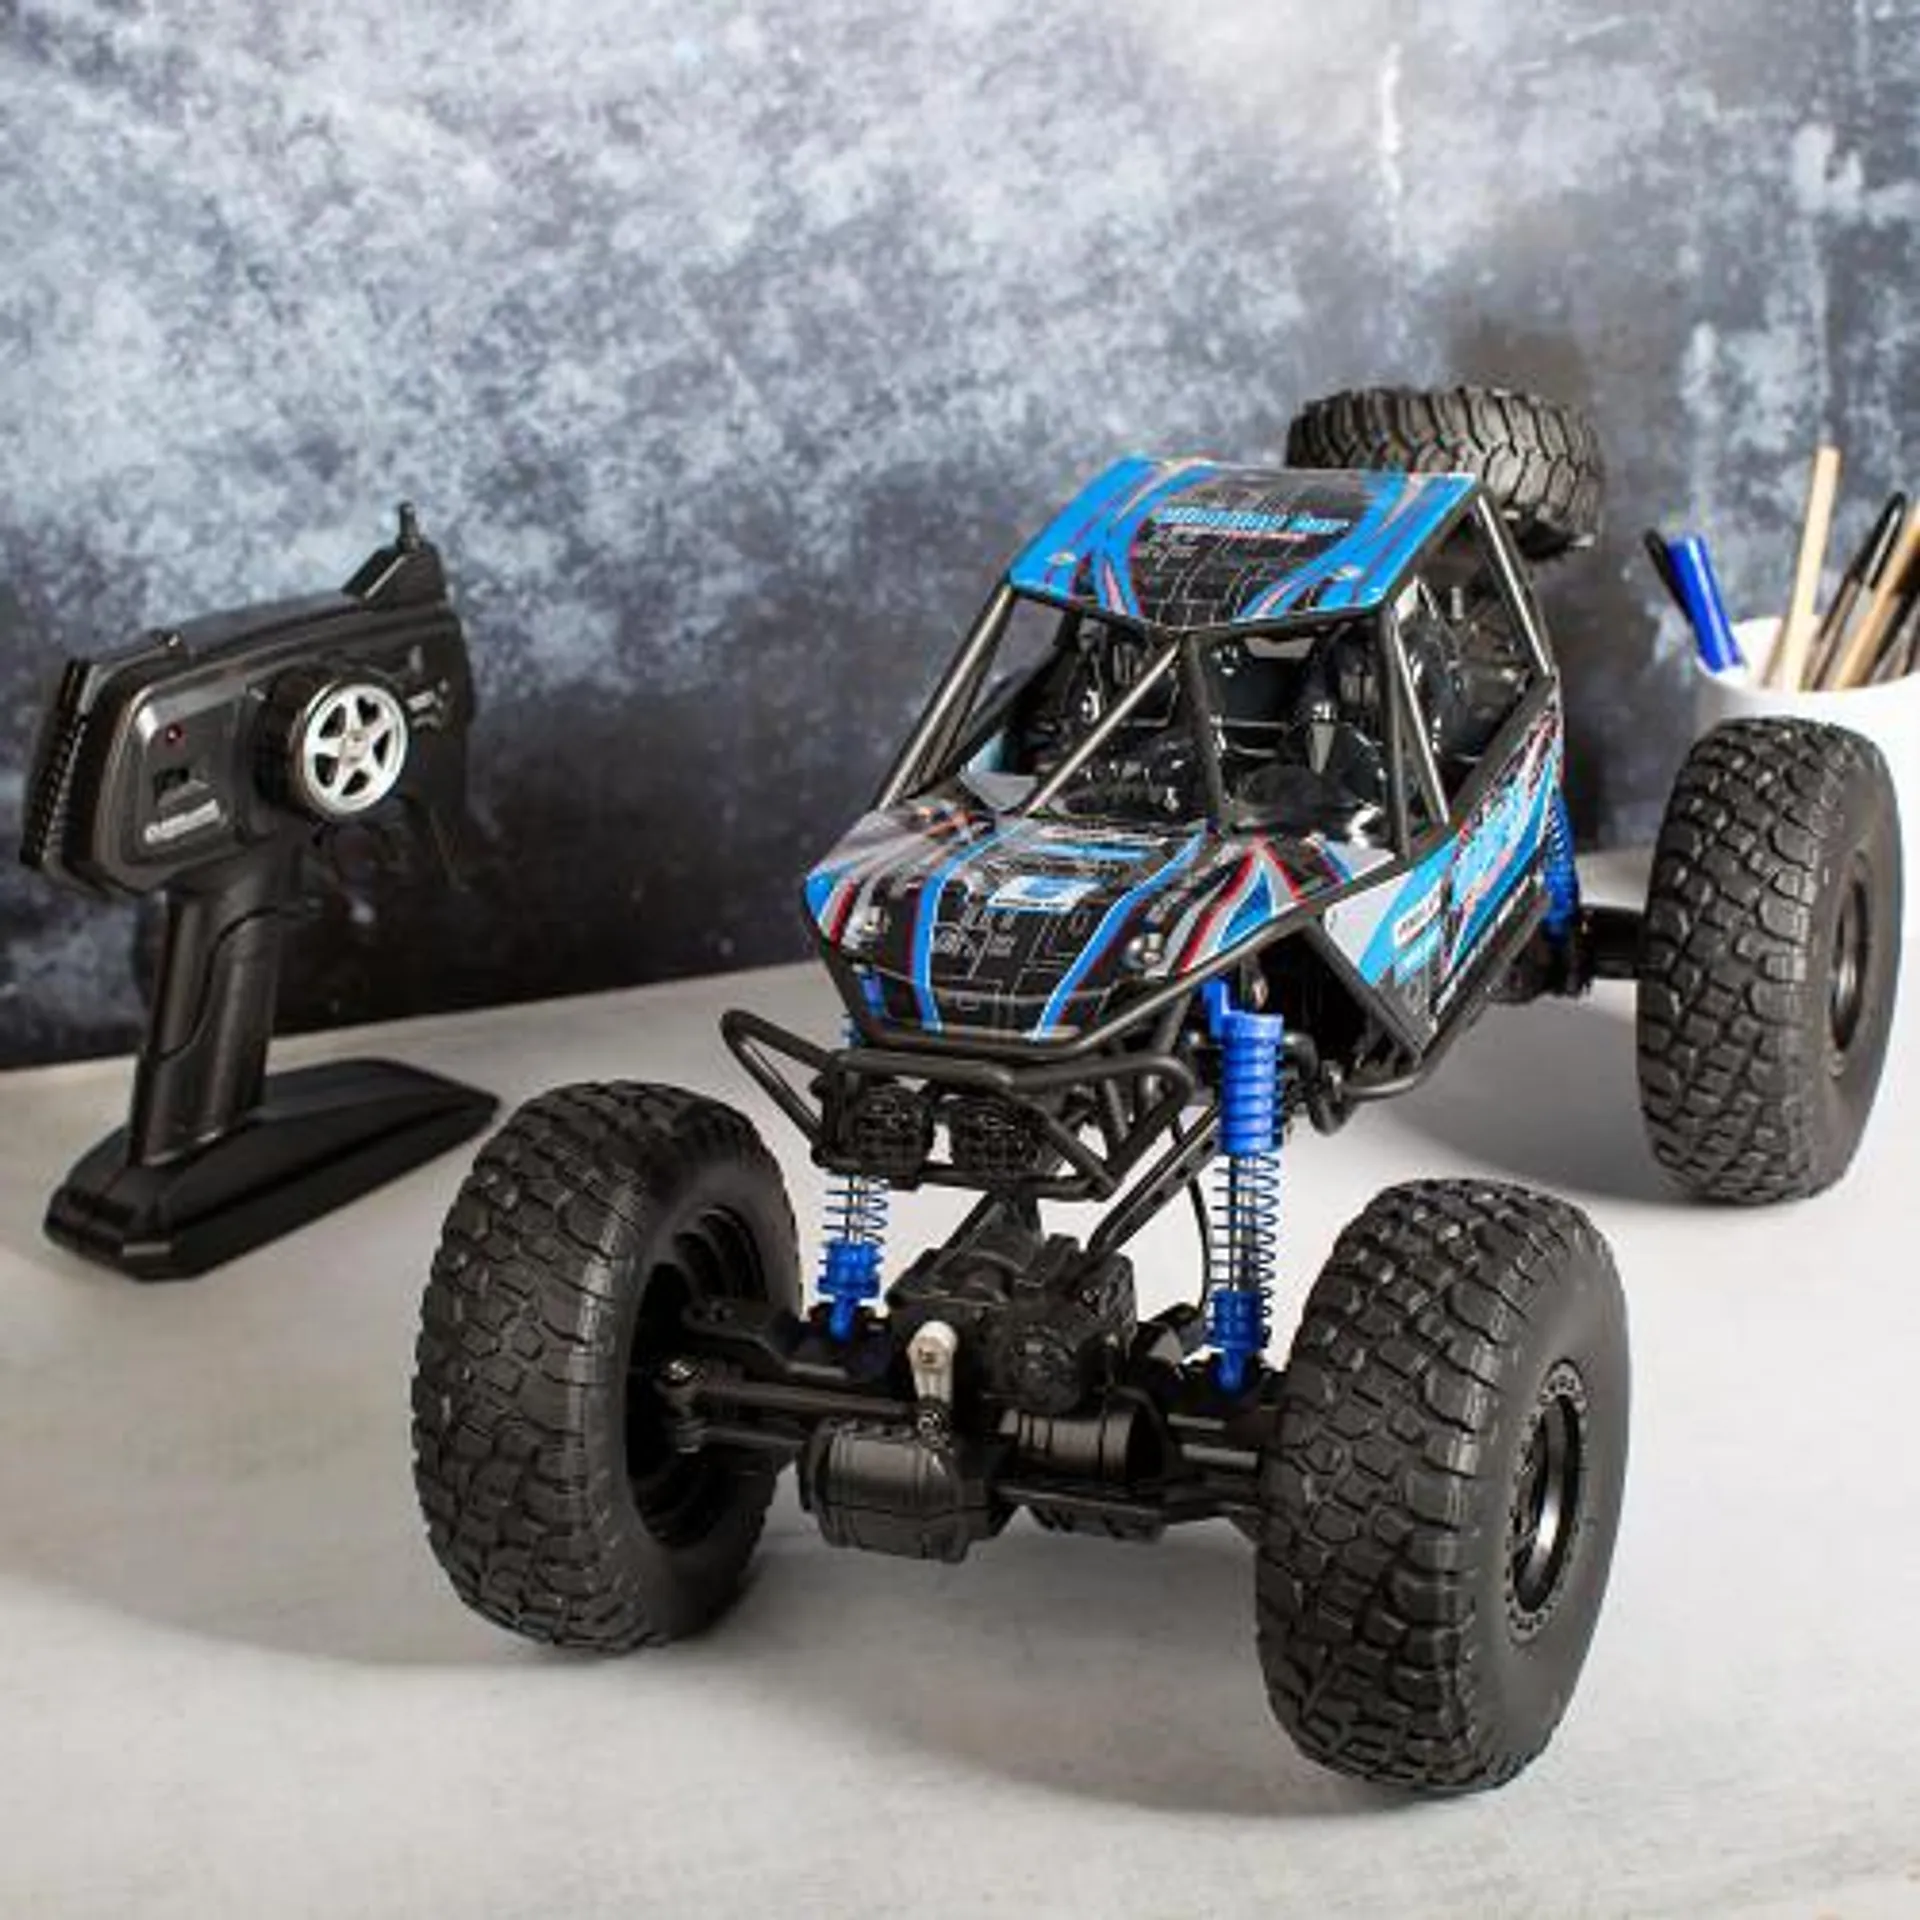 RED5 Remote Control Dune Buggy Blue in 1:10 Scale